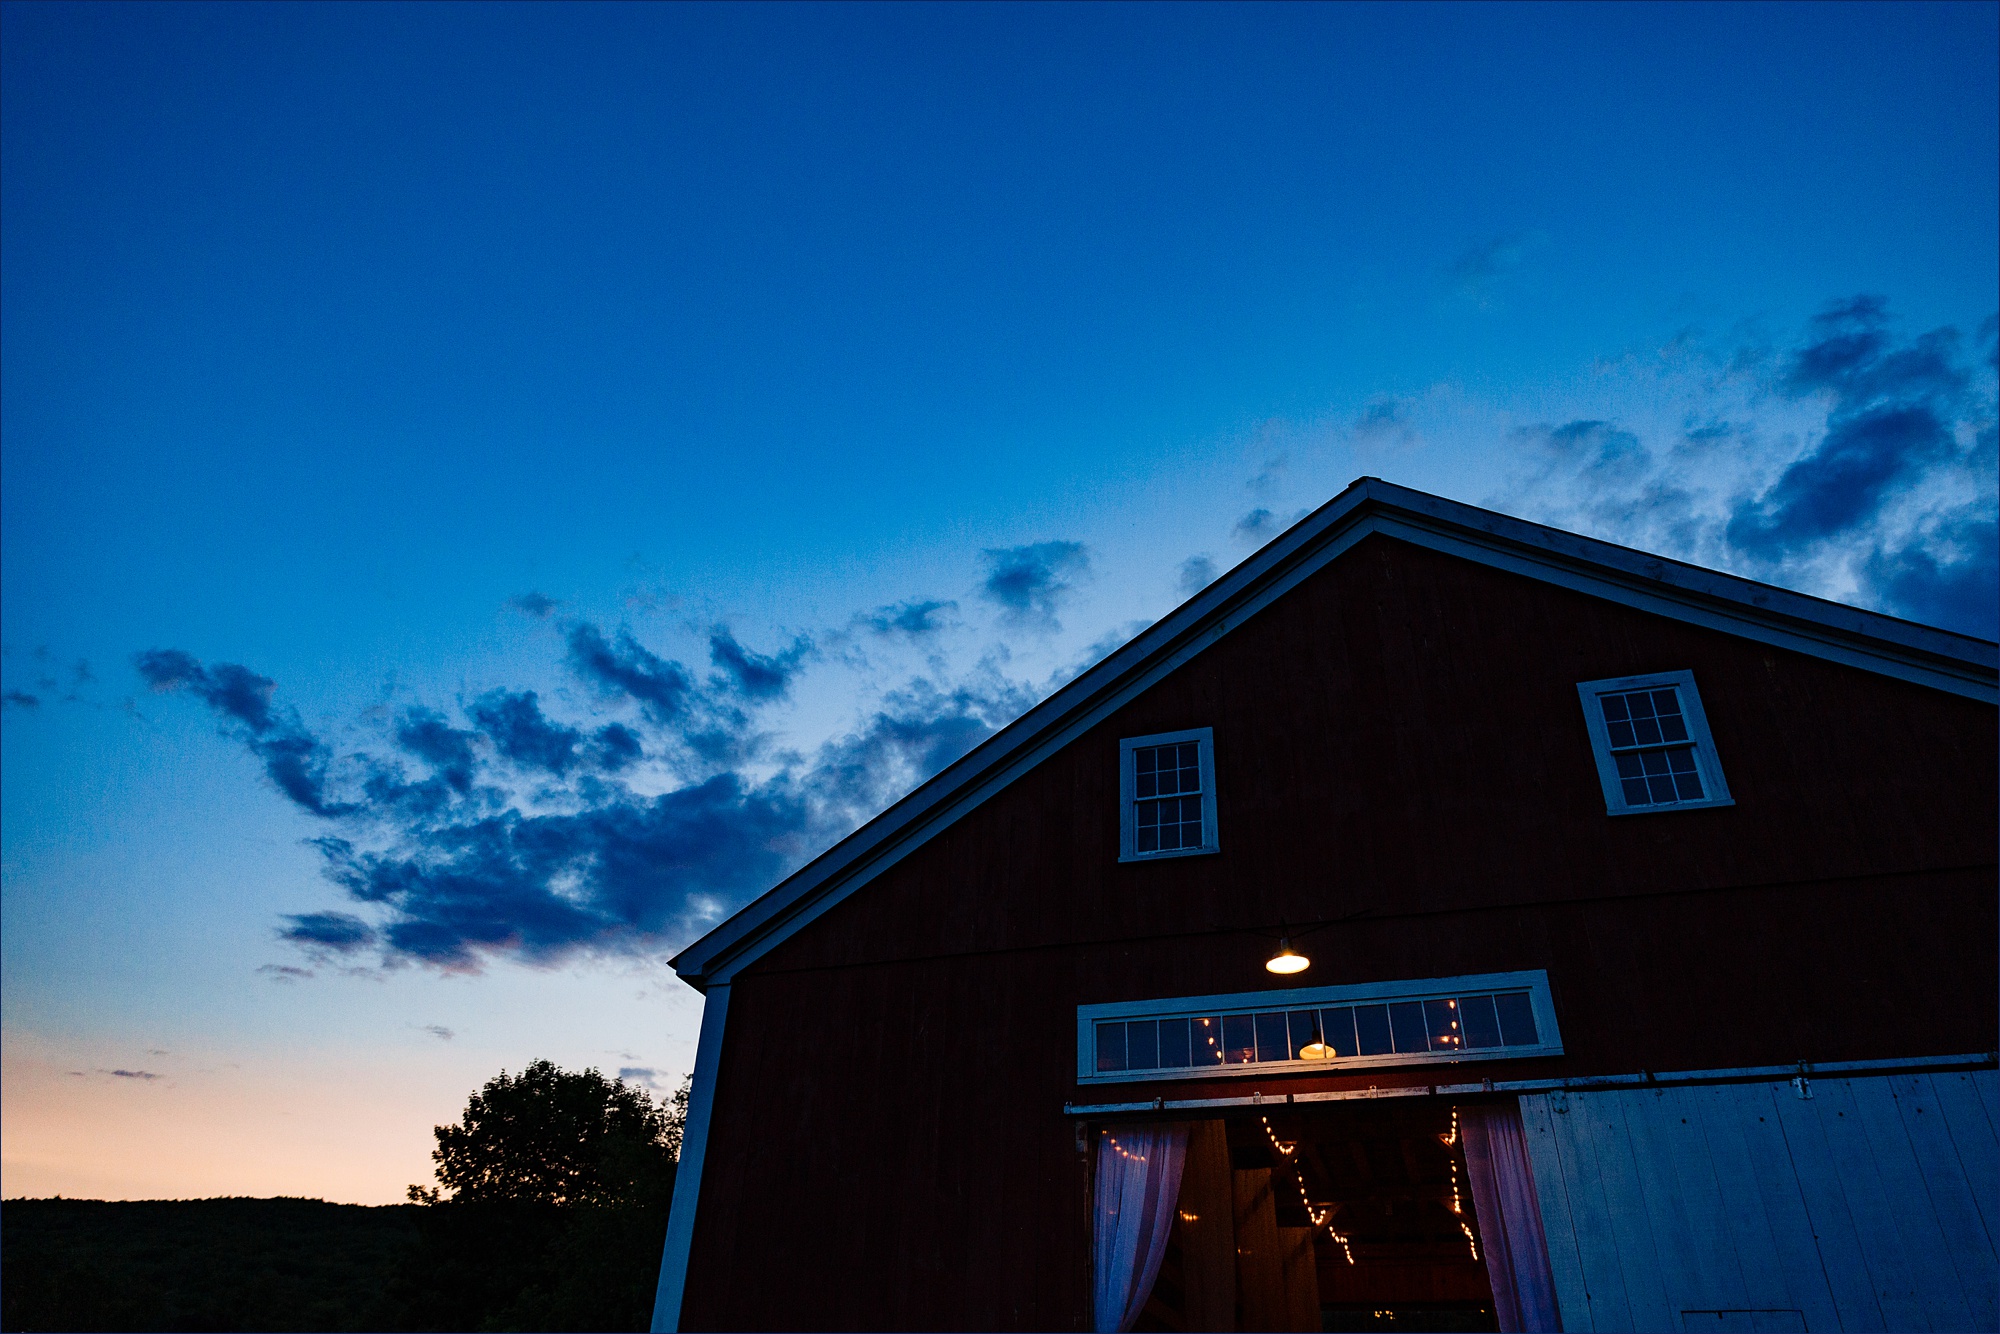 The barn at Kitz Farm in Strafford New Hampshire against a blue sky